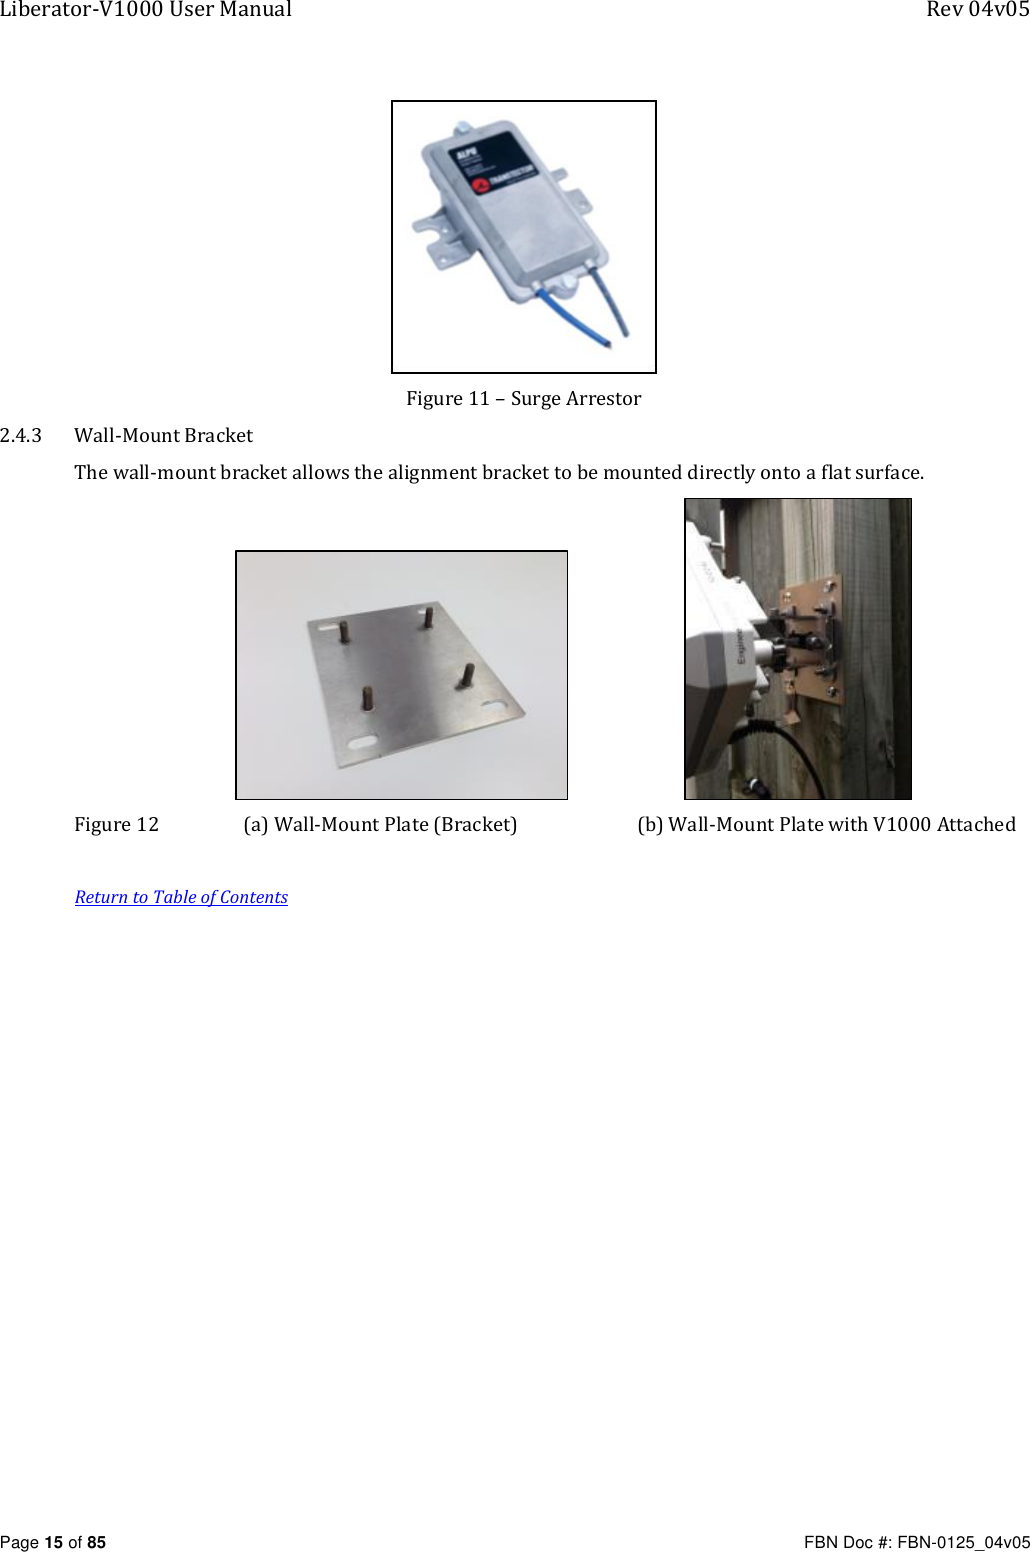 Liberator-V1000 User Manual  Rev 04v05     Page 15 of 85   FBN Doc #: FBN-0125_04v05  Figure 11 – Surge Arrestor 2.4.3 Wall-Mount Bracket The wall-mount bracket allows the alignment bracket to be mounted directly onto a flat surface.                                Figure 12   (a) Wall-Mount Plate (Bracket)  (b) Wall-Mount Plate with V1000 Attached  Return to Table of Contents     